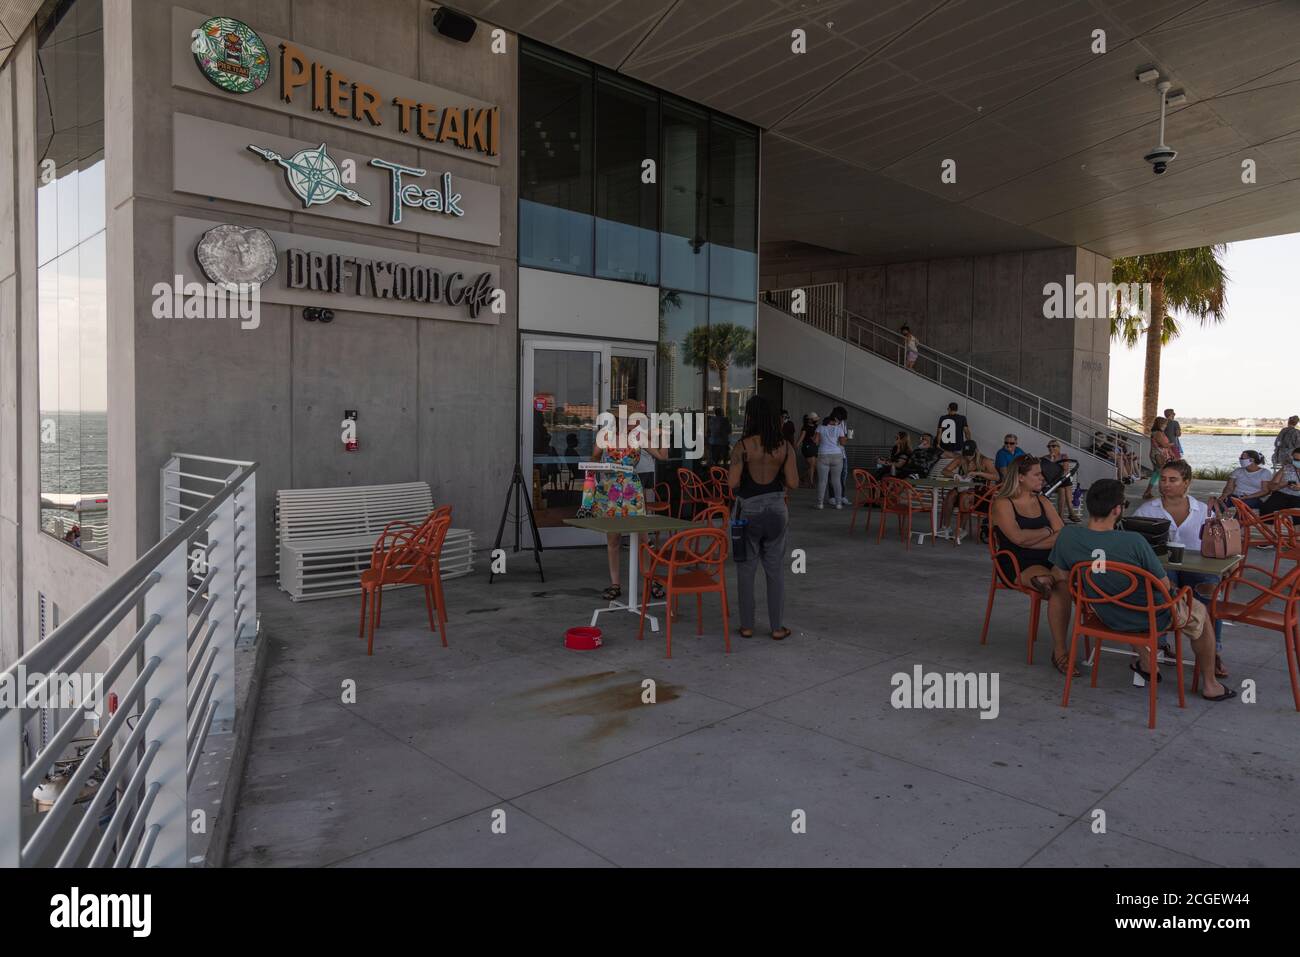 Food Court at the St. Petersburg's new Pier district. St. Petersburg, Florida, USA Stock Photo